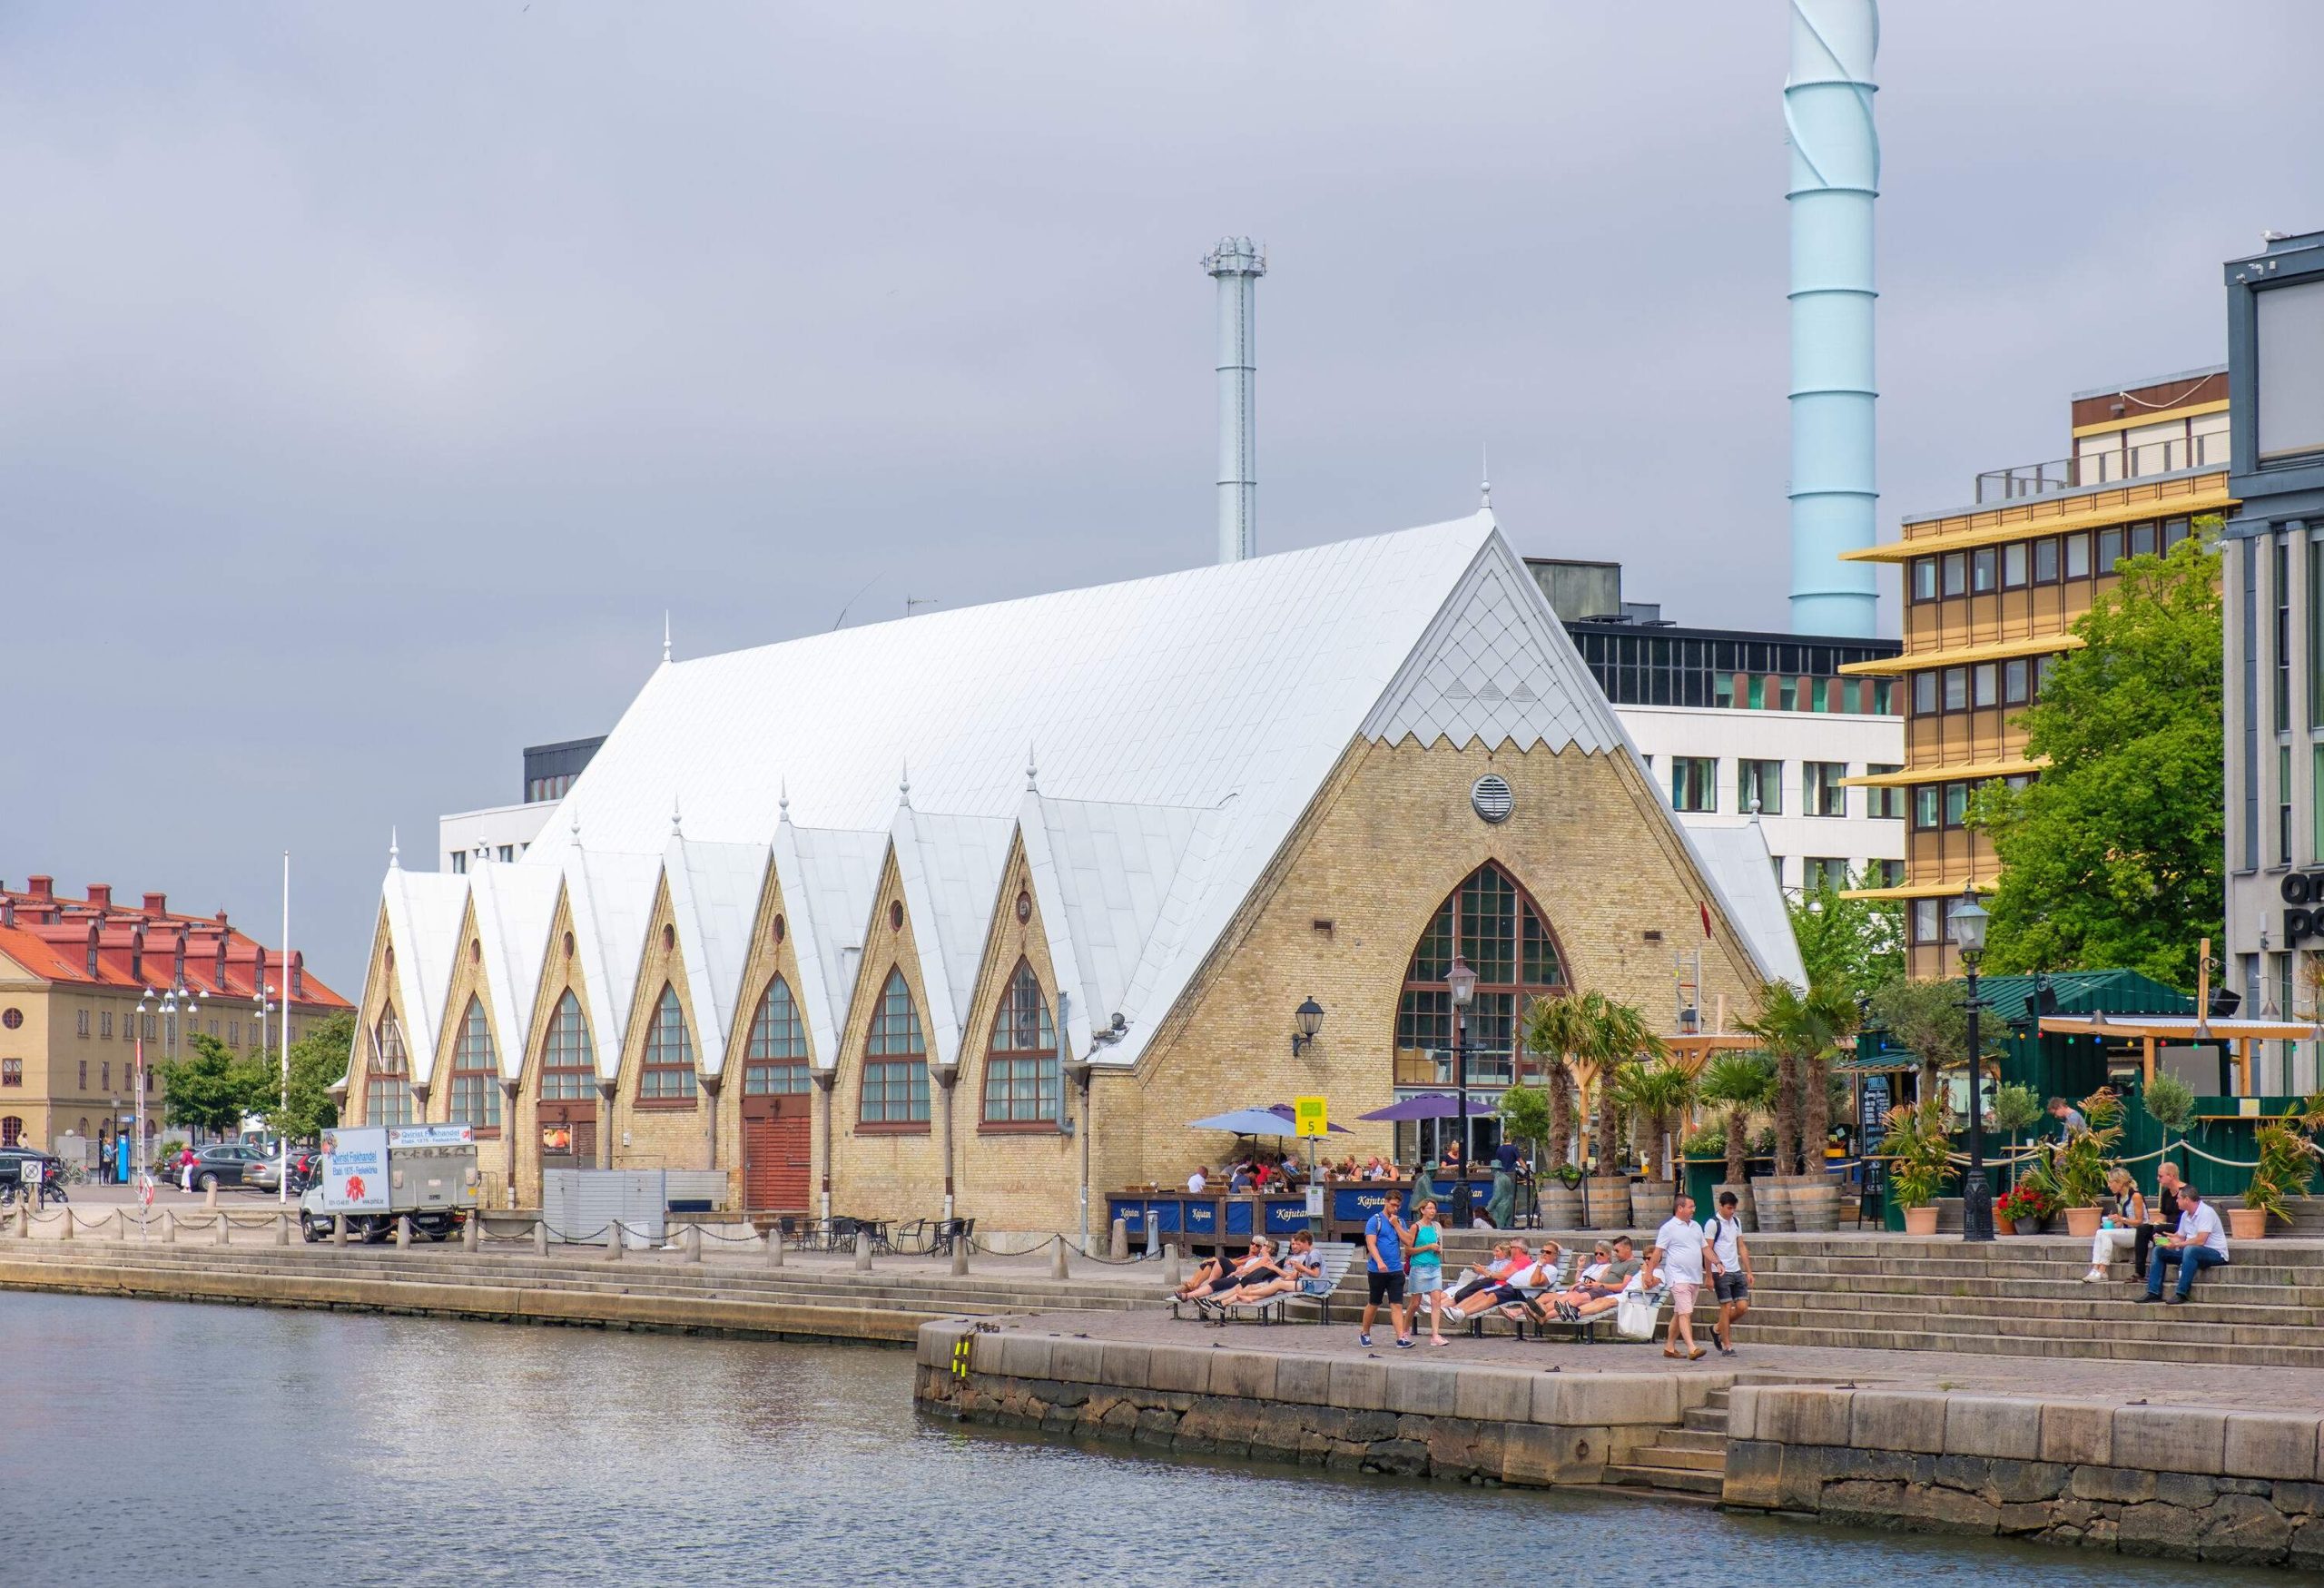 An iconic indoor fish market resembling a Gothic church with arched windows under a steeply pitched roof.